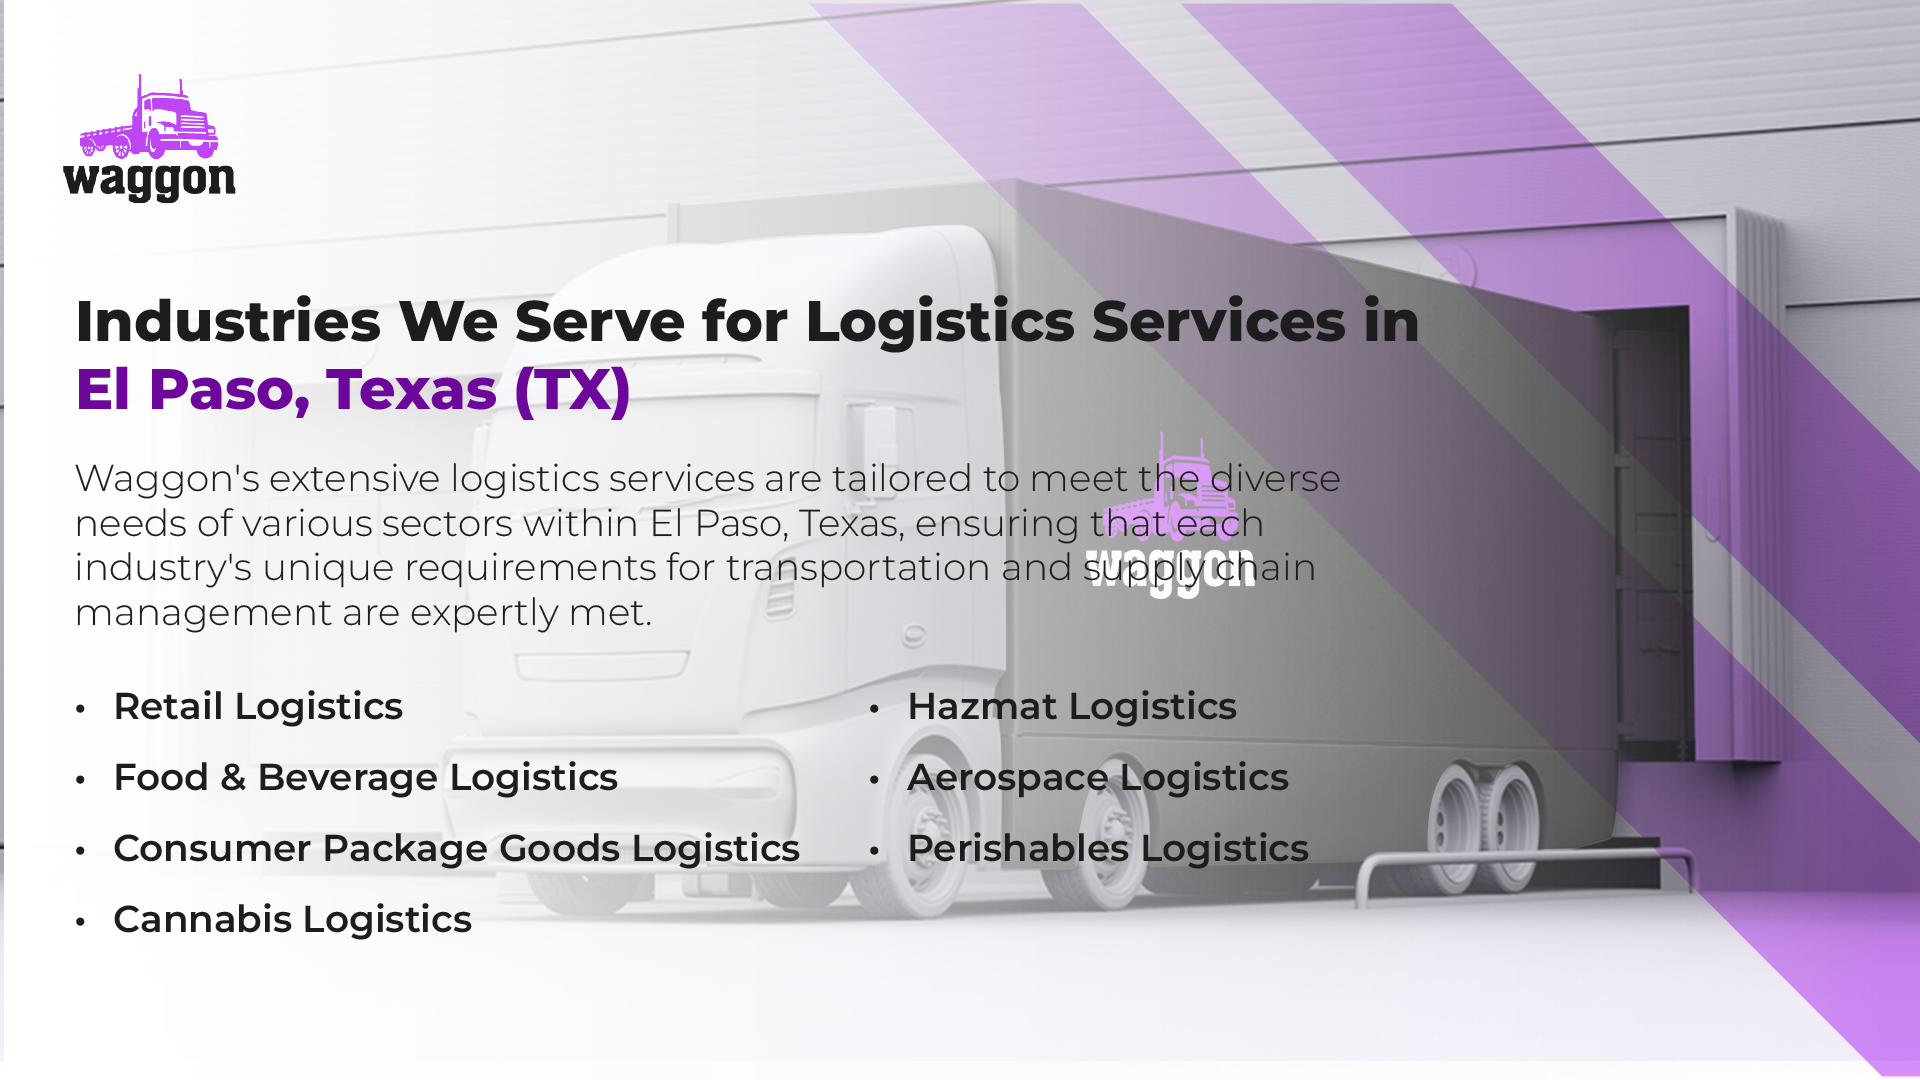 Industries We Serve for Logistics Services in El Paso, Texas (TX)